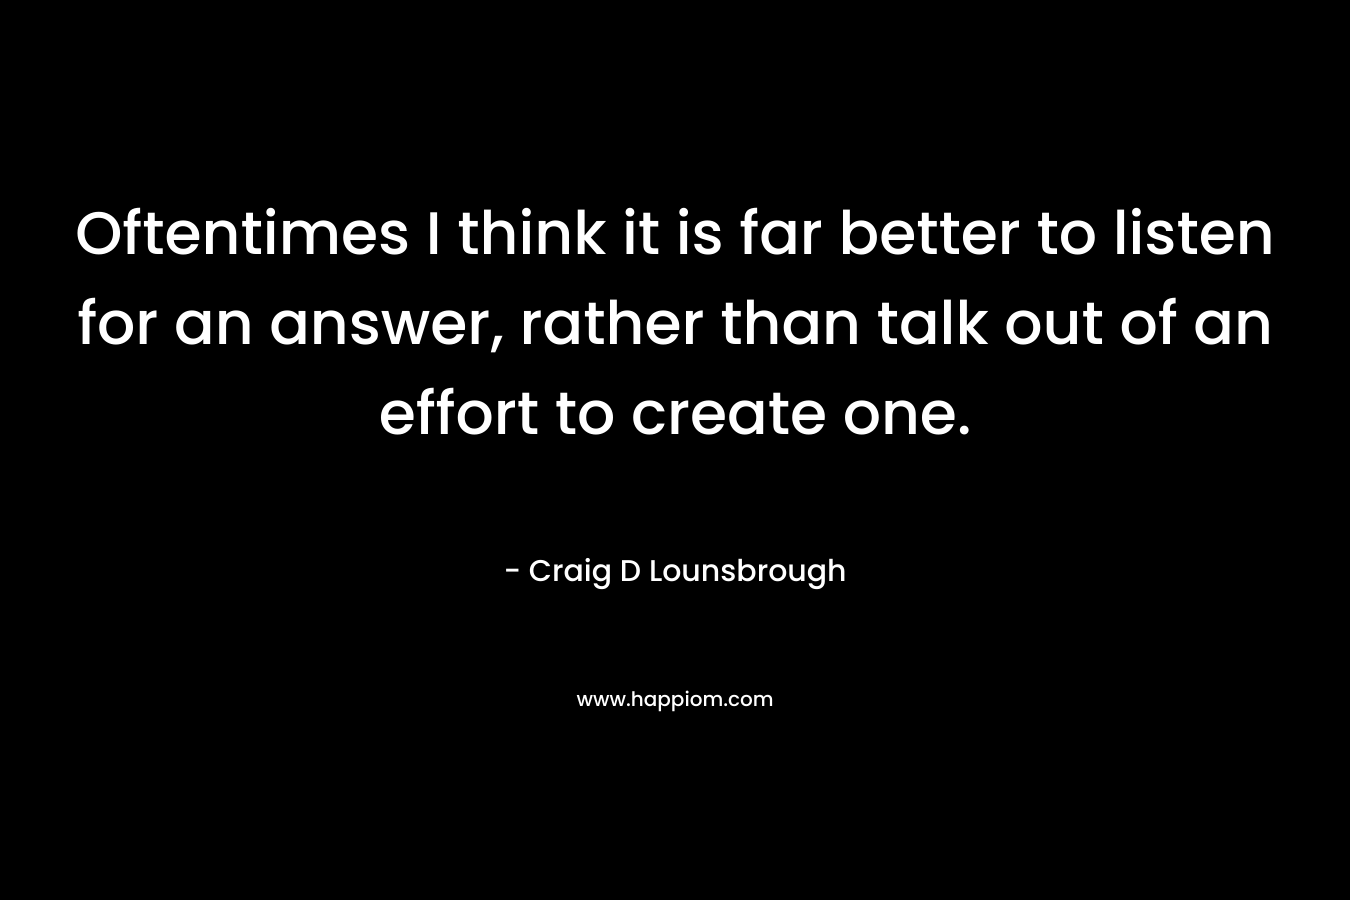 Oftentimes I think it is far better to listen for an answer, rather than talk out of an effort to create one. – Craig D Lounsbrough